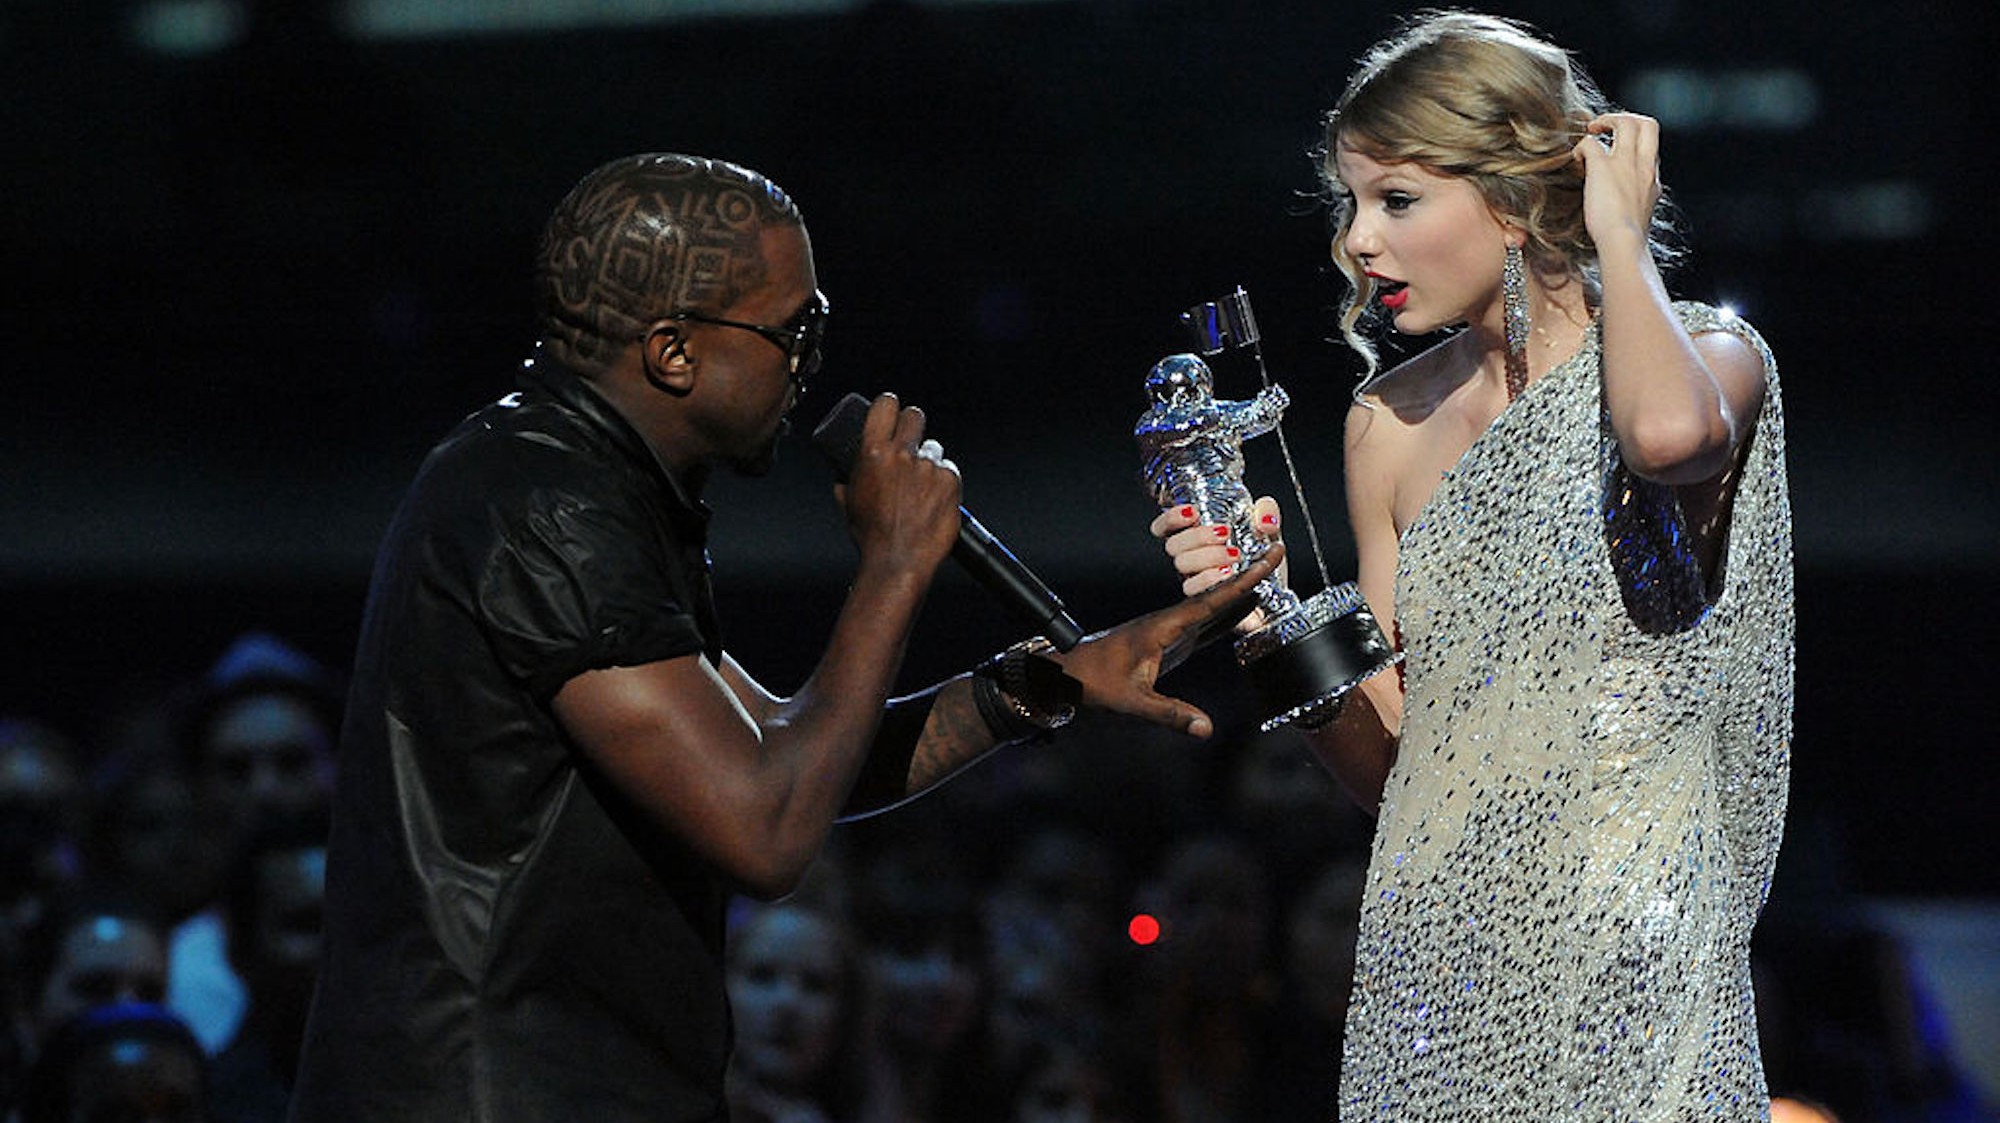 Kanye West And Taylor Swifts Vma Fiasco Would Never Happen